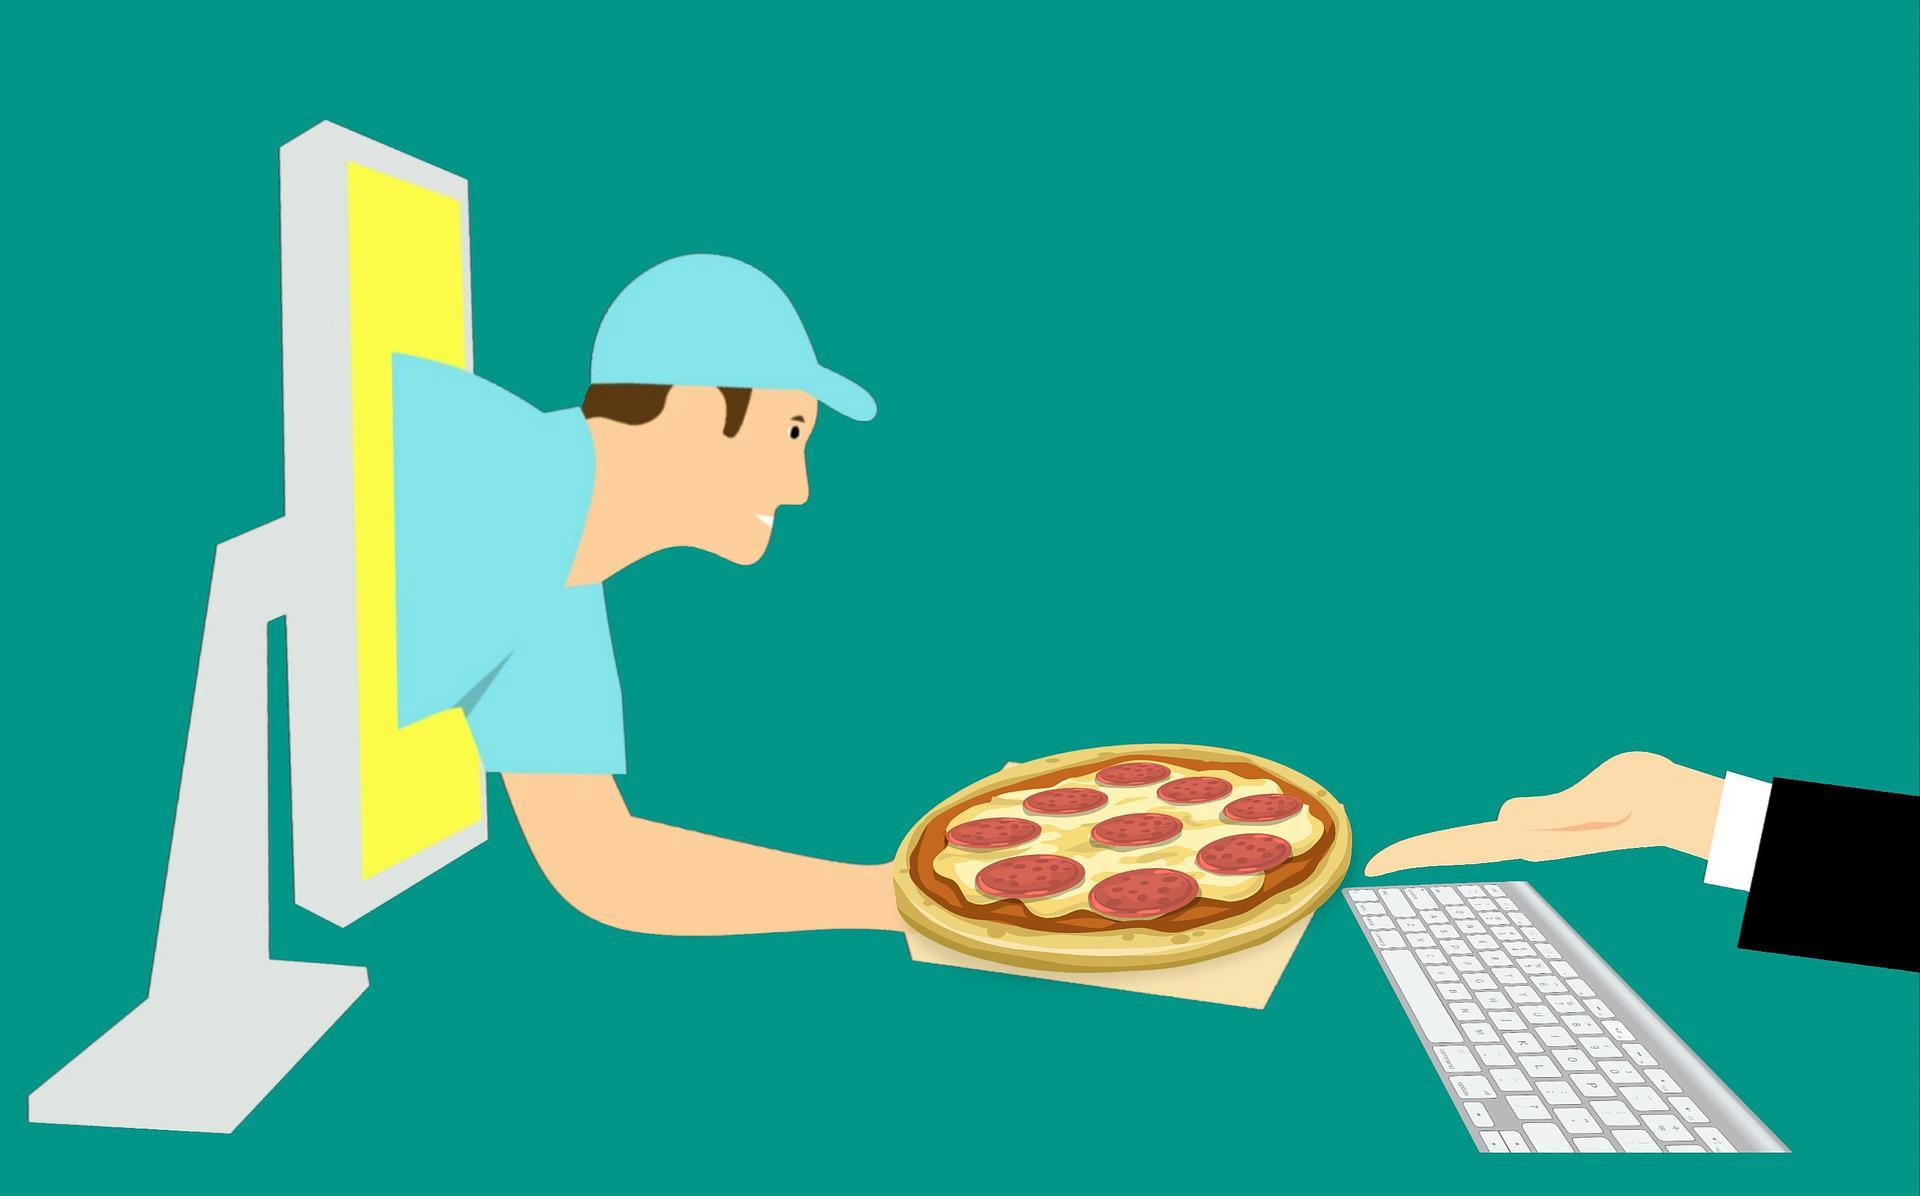 Pizza in the post is a great ecommerce business idea